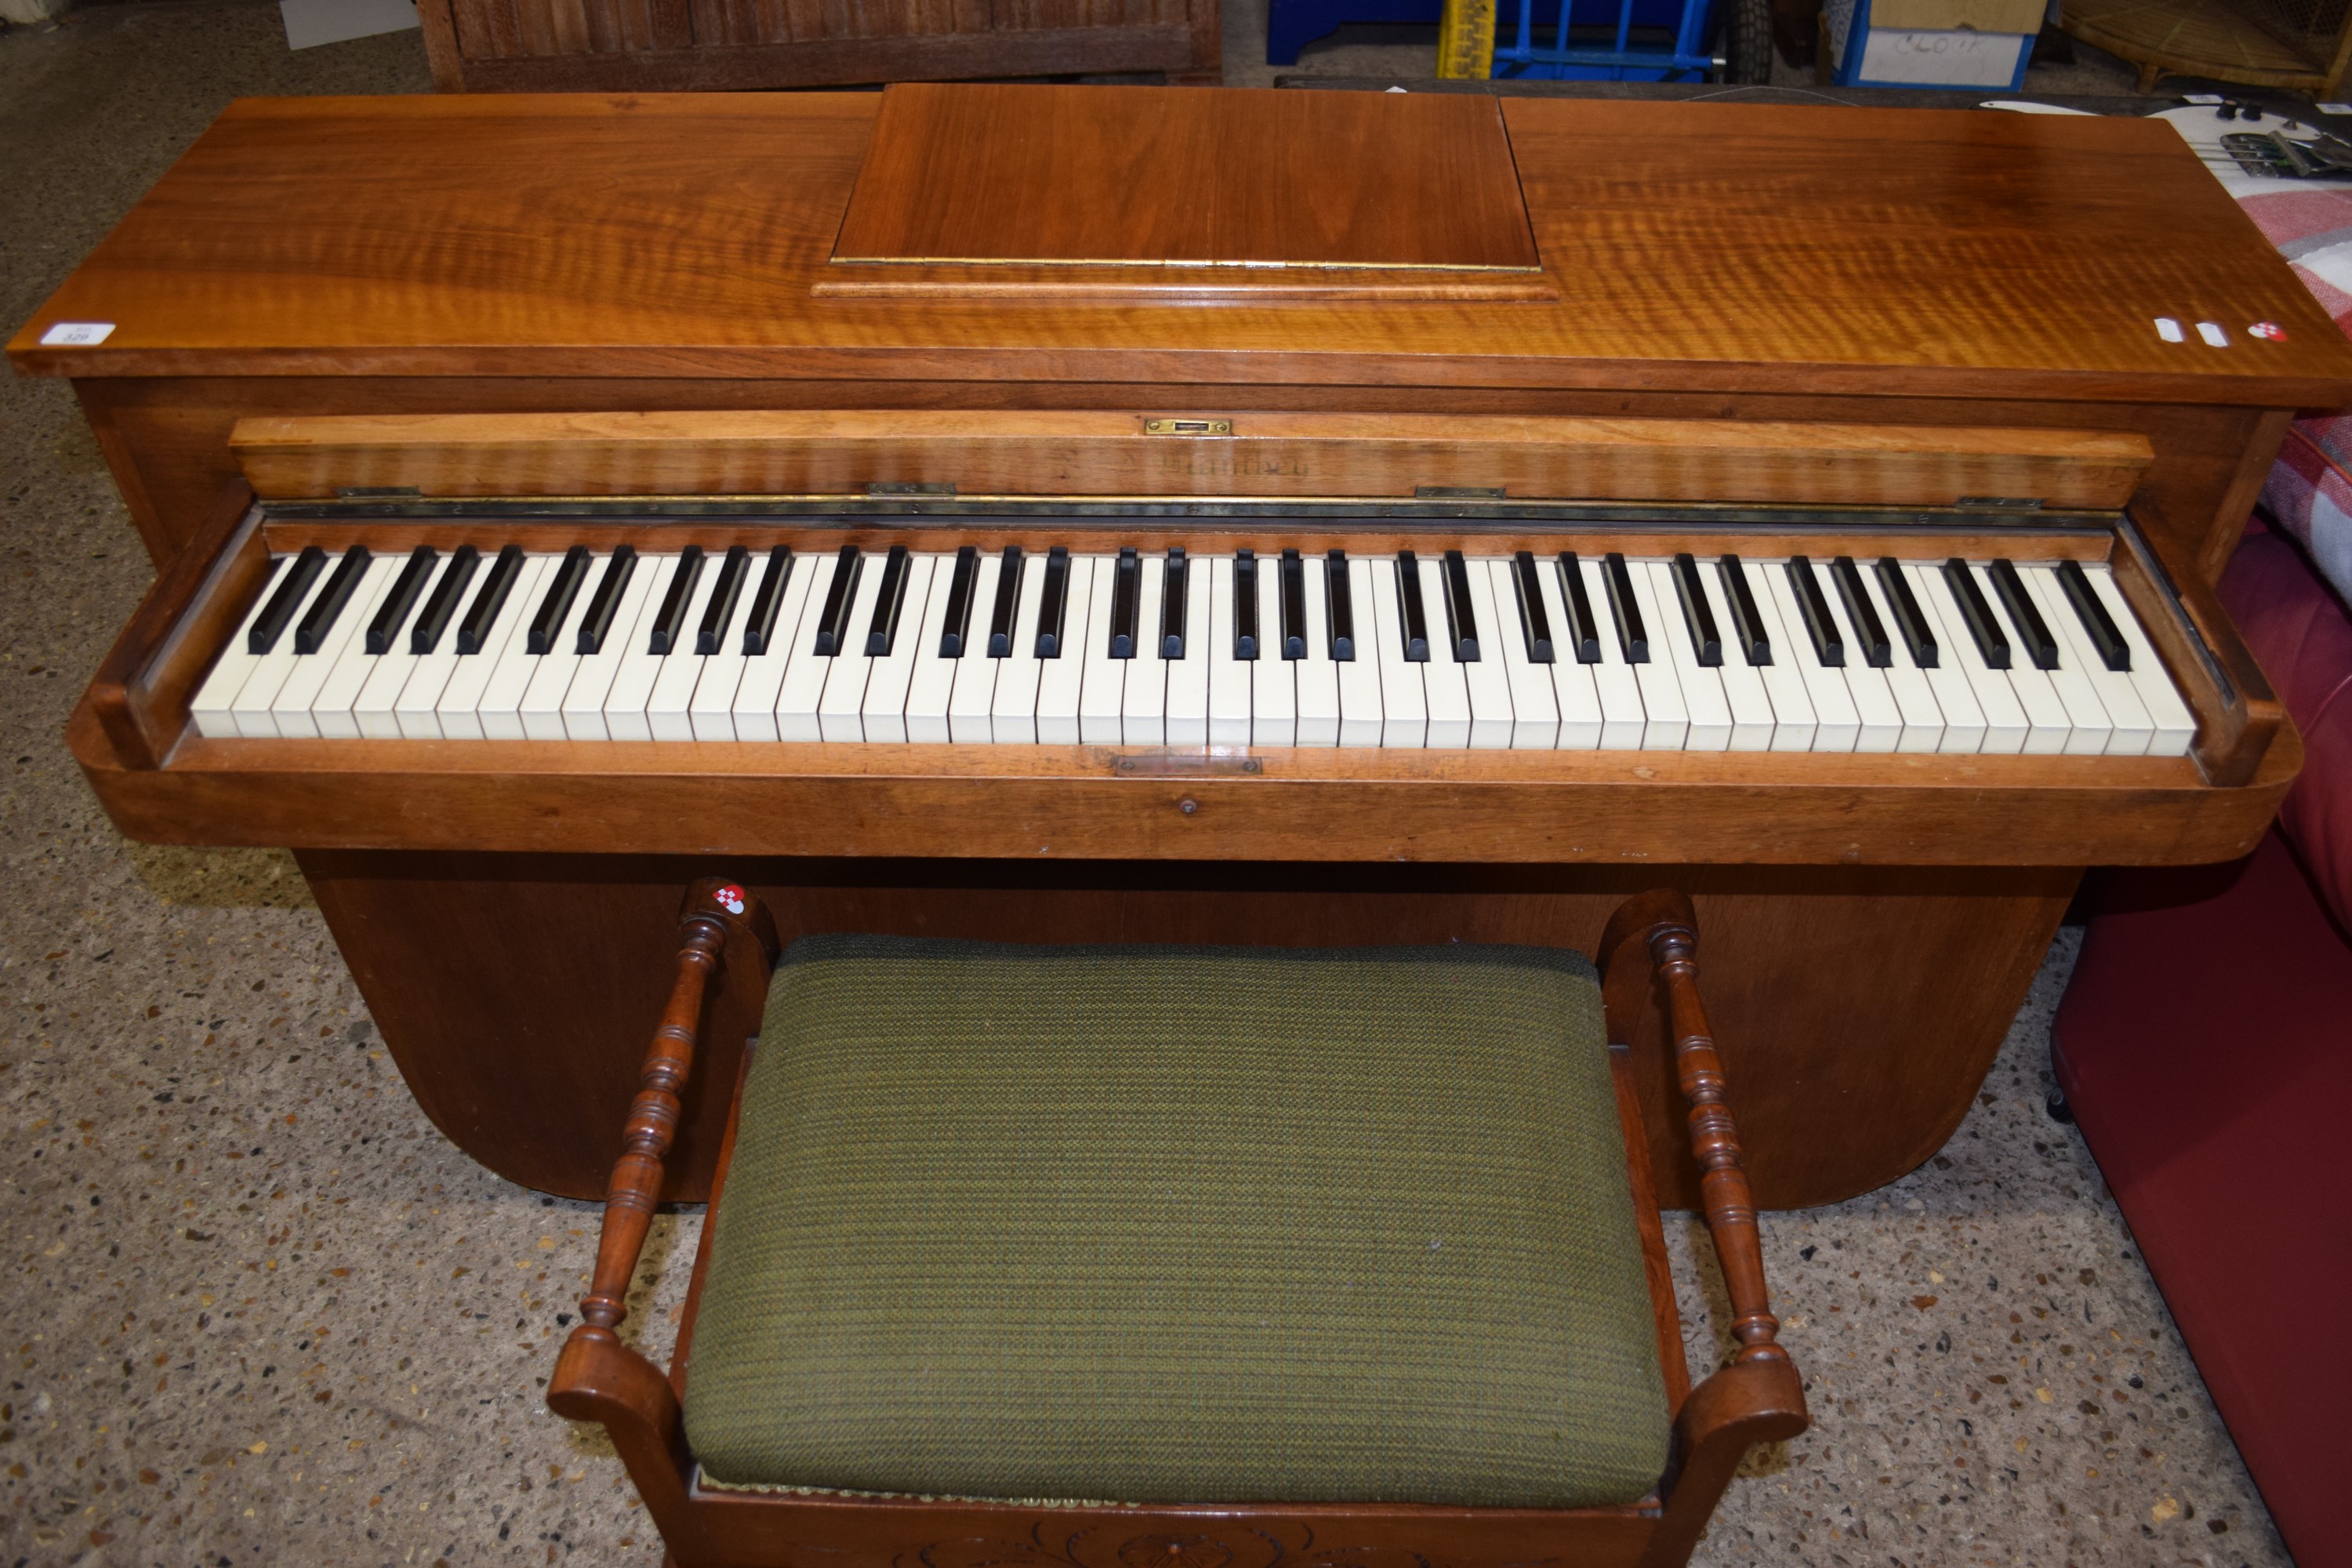 CIRCA 1930S COMPACT PIANO IN ART DECO STYLE CASE, INDISTINCT MAKERS/RETAILERS NAME, WIDTH APPROX - Image 2 of 3